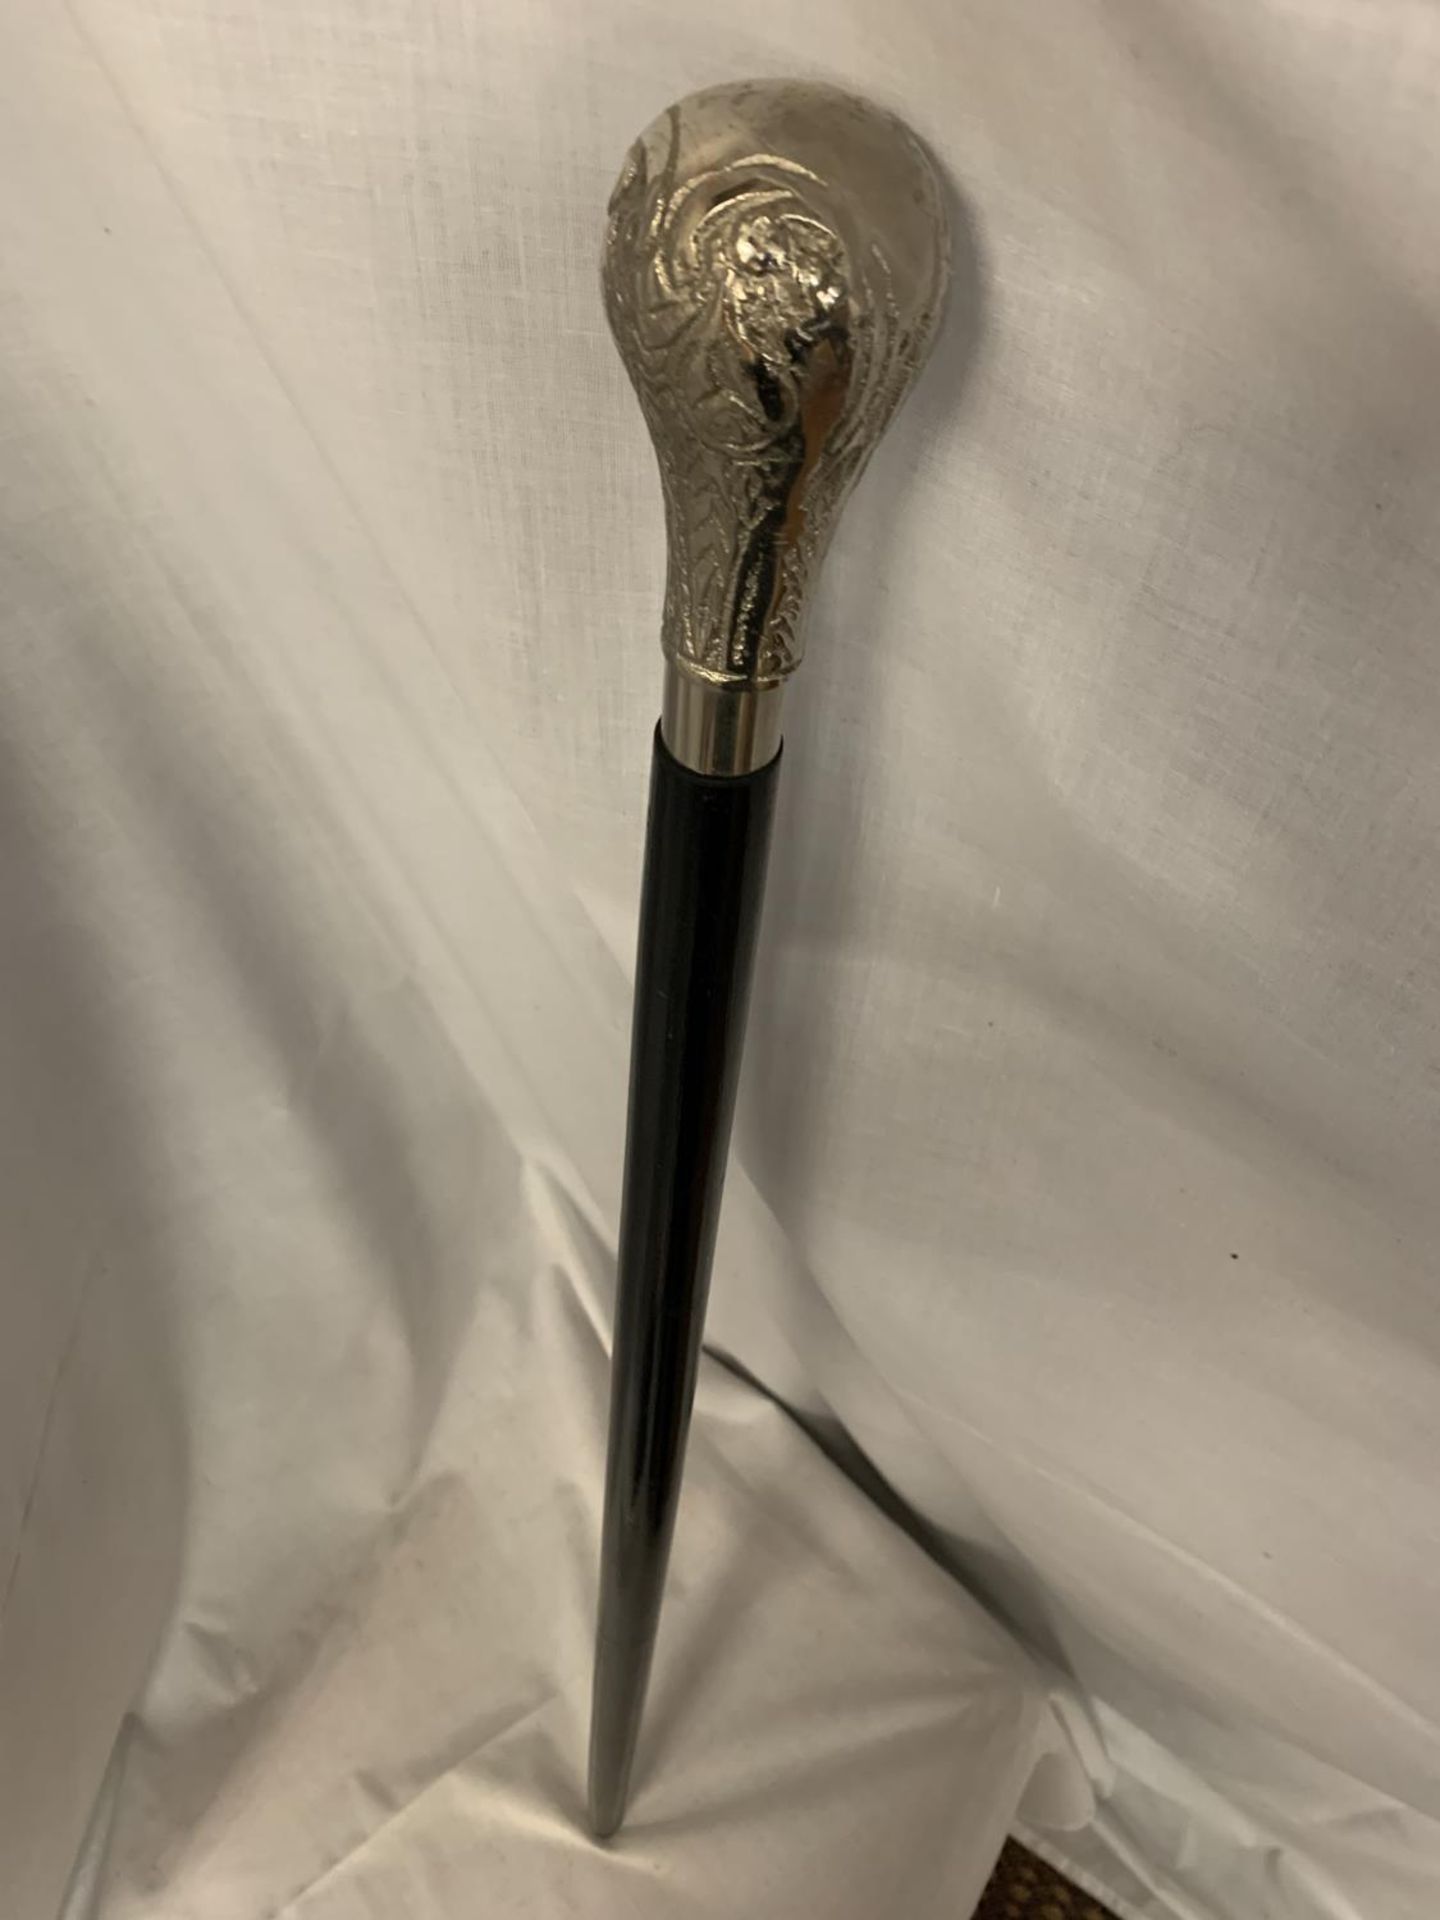 A BLACK WALKING CANE WITH WHITE METAL HANDLE - Image 3 of 3